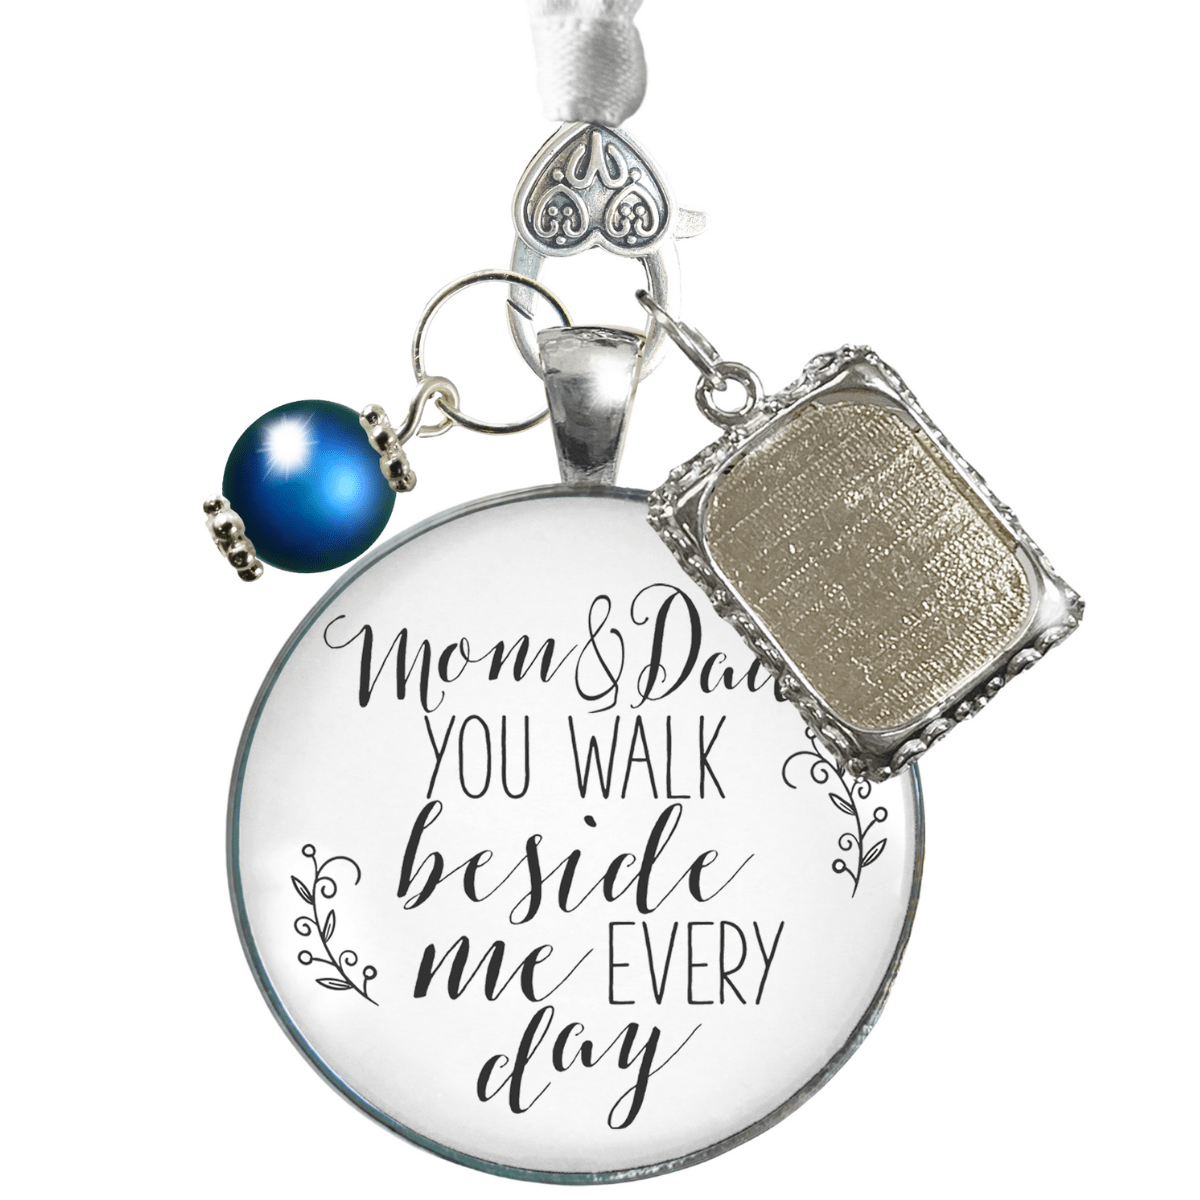 Bouquet Charm Bridal Mom And Dad Bride Parents White Blue Photo Frame Wedding Jewels - Gutsy Goodness Handmade Jewelry Gifts